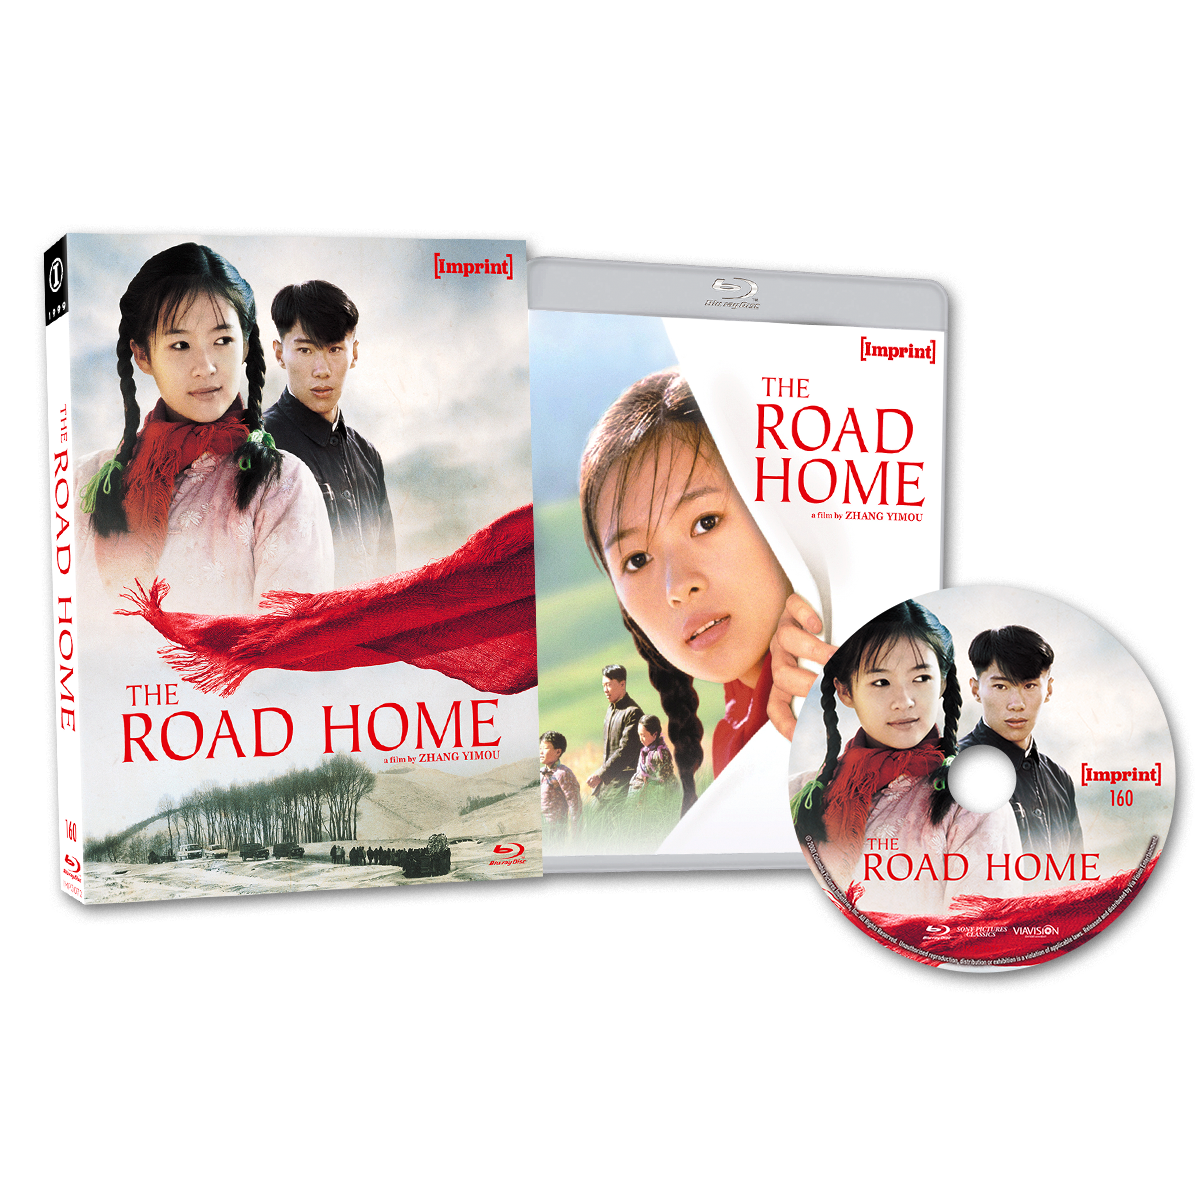 The Road Home (1999) Imprint Collection 160 Via Vision Entertainment